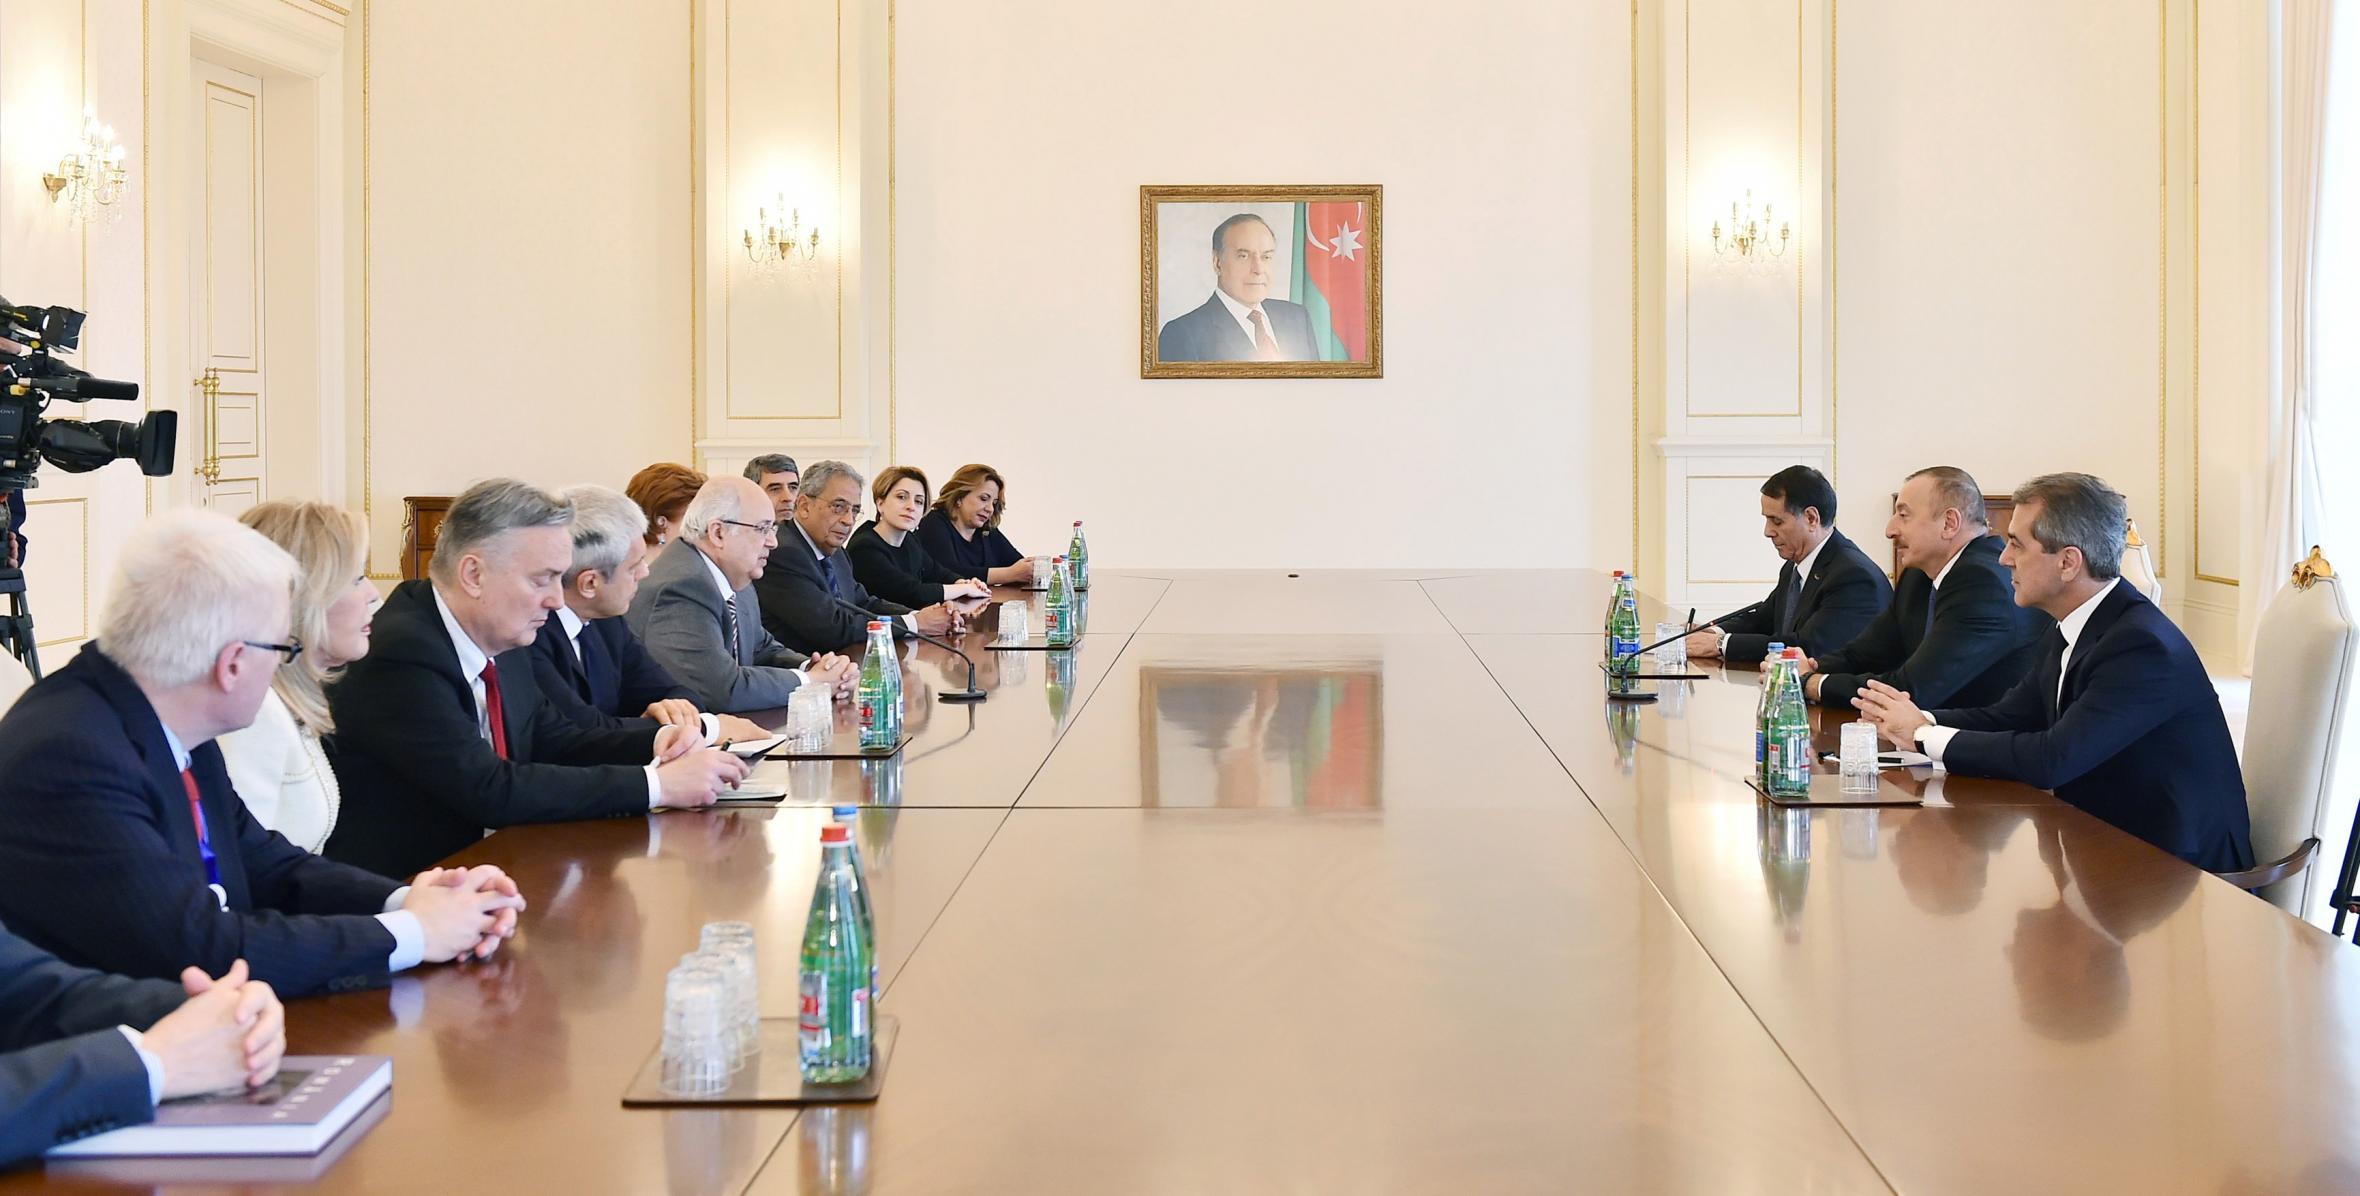 Ilham Aliyev received co-chairs and members of Board of Trustees of Nizami Ganjavi International Center